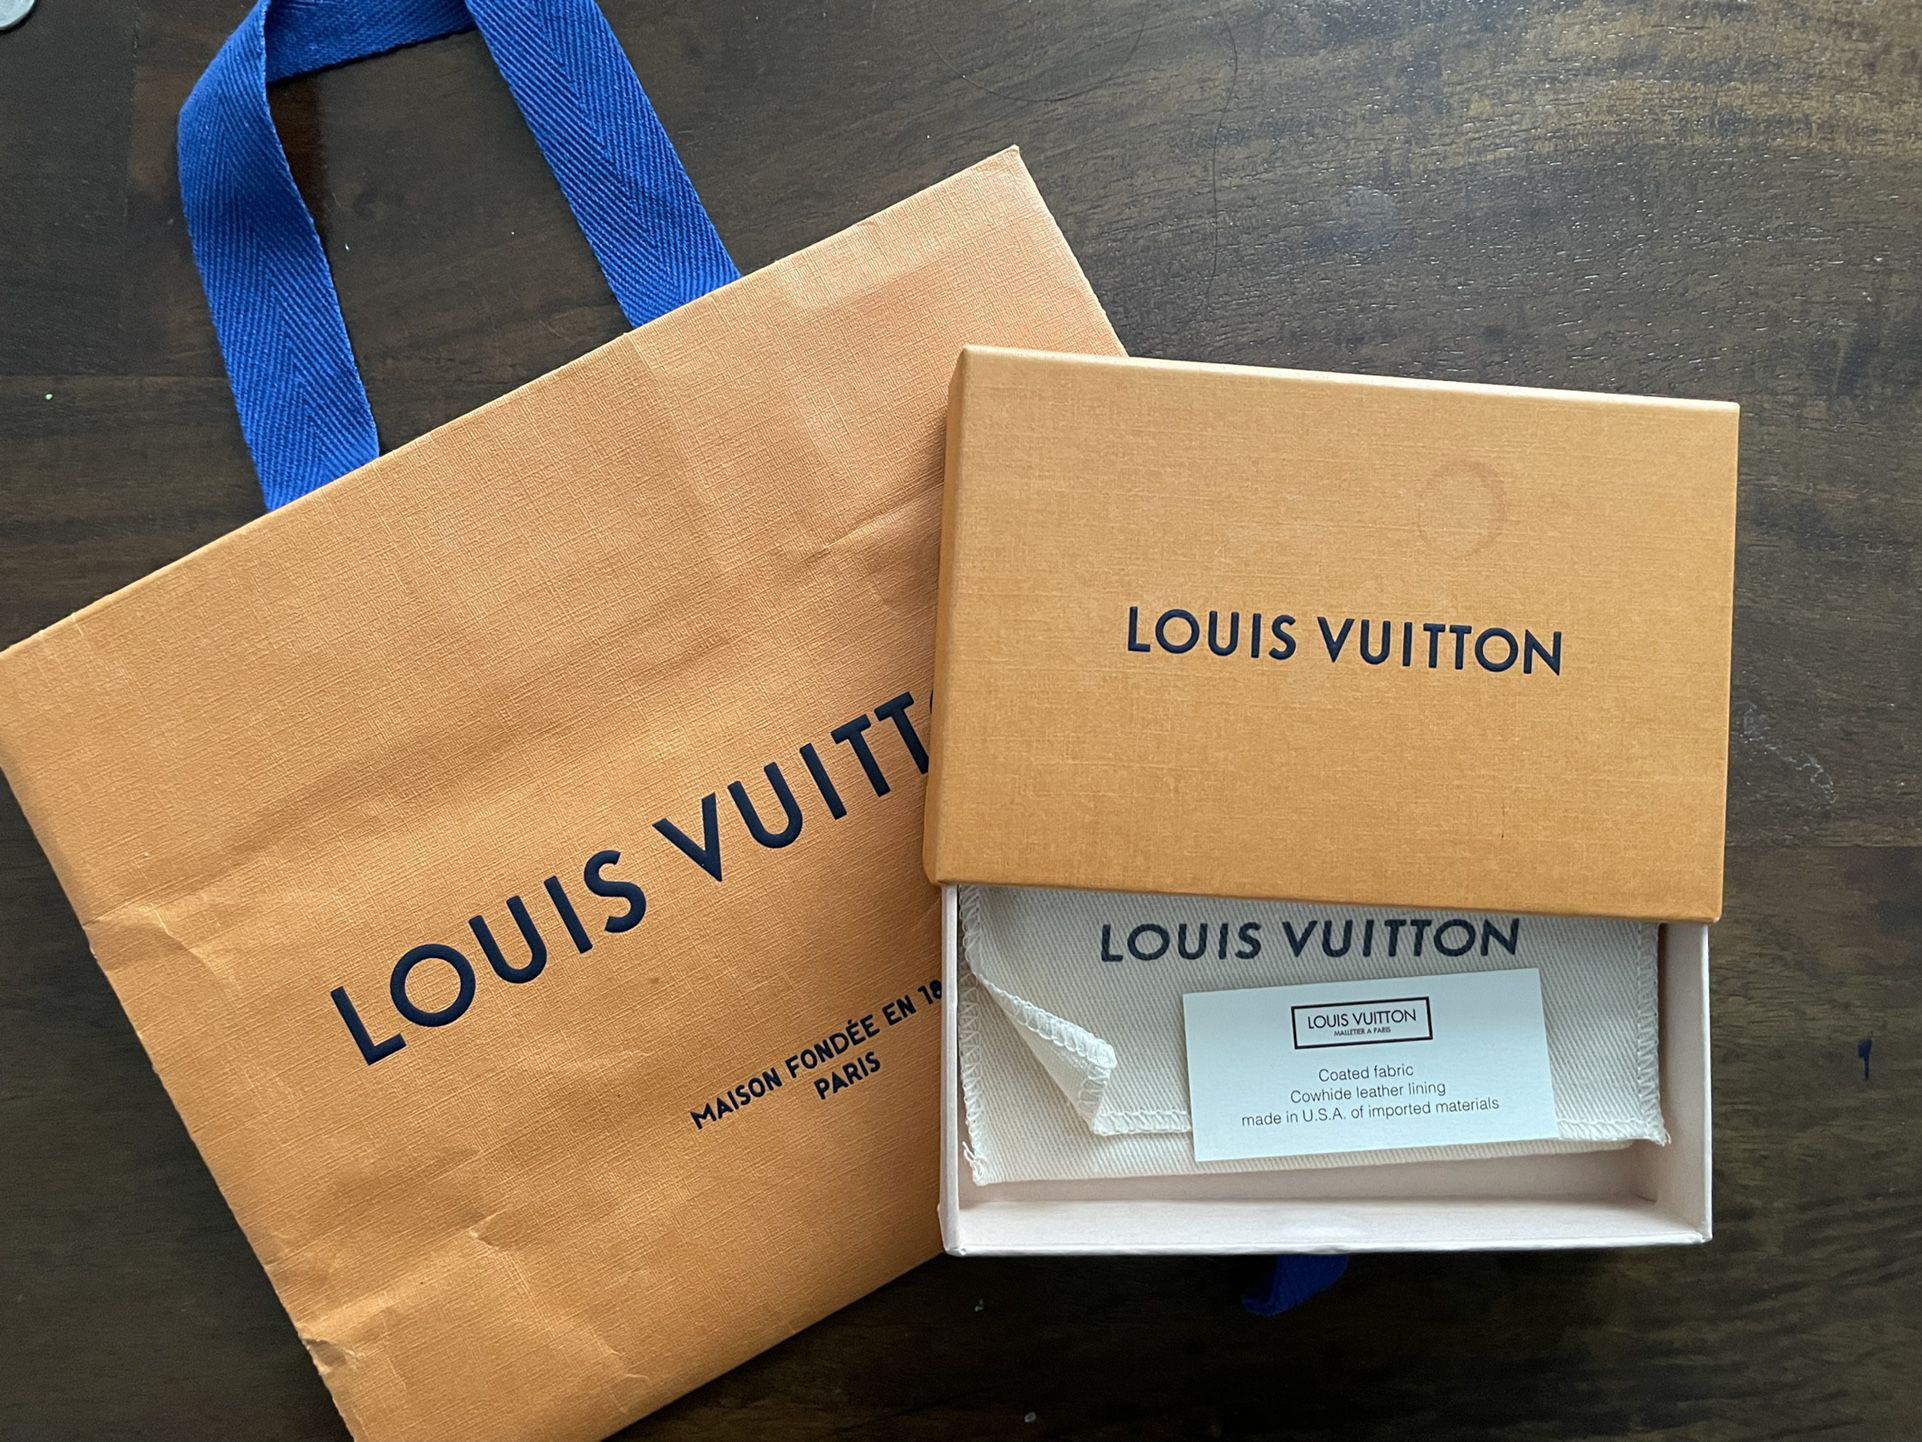 Louis Vuitton Gift Box Set Small for Sale in Chula Vista, CA - OfferUp